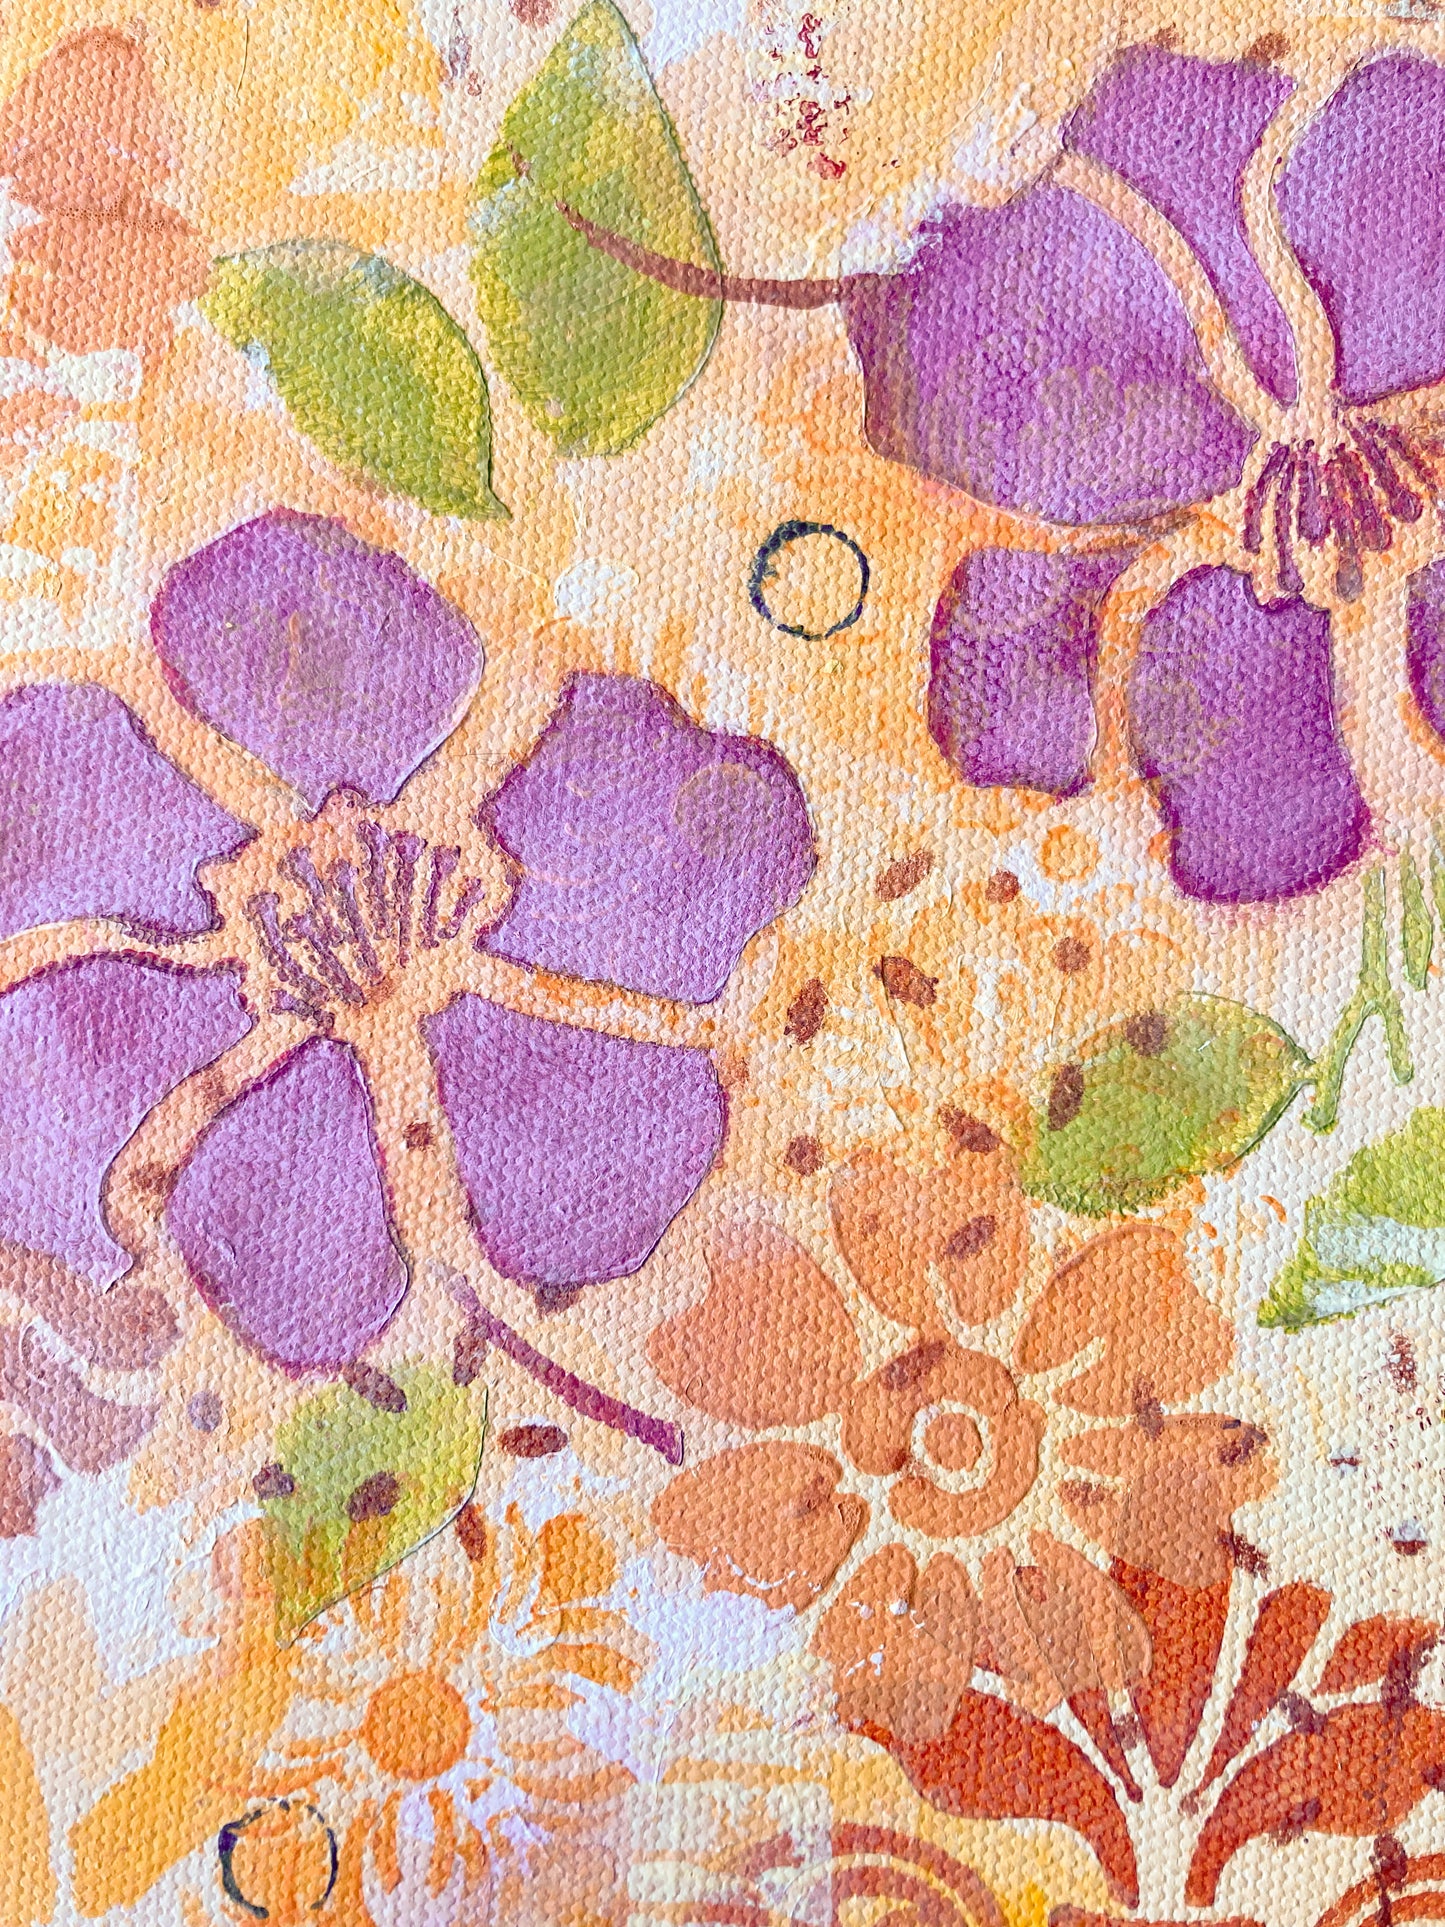 detail photo floral Hawaiian theme acrylic painting on canvas purple flowers orange flowers green leaves circles and scrolling shapes warm and cheerful